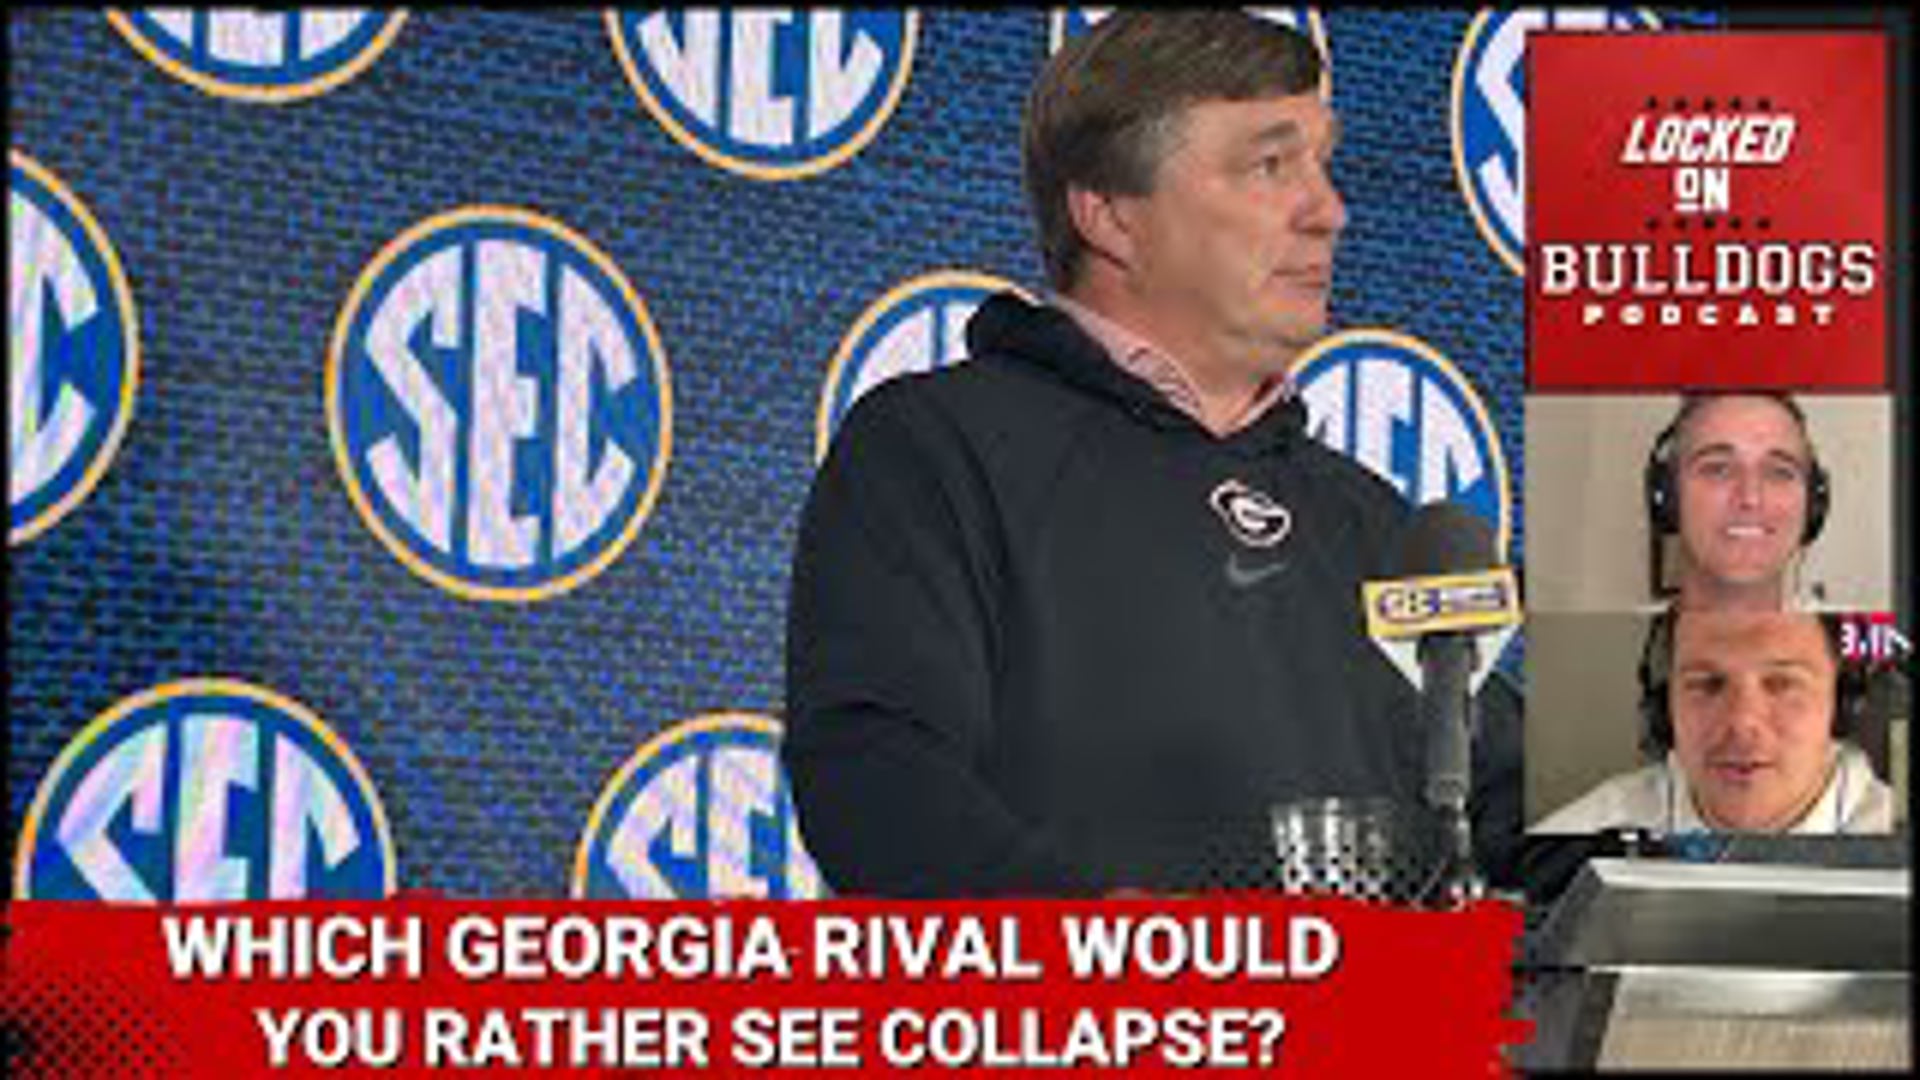 Georgia Football rivals are on the way down... Who would Georgia fans rather see collapse??